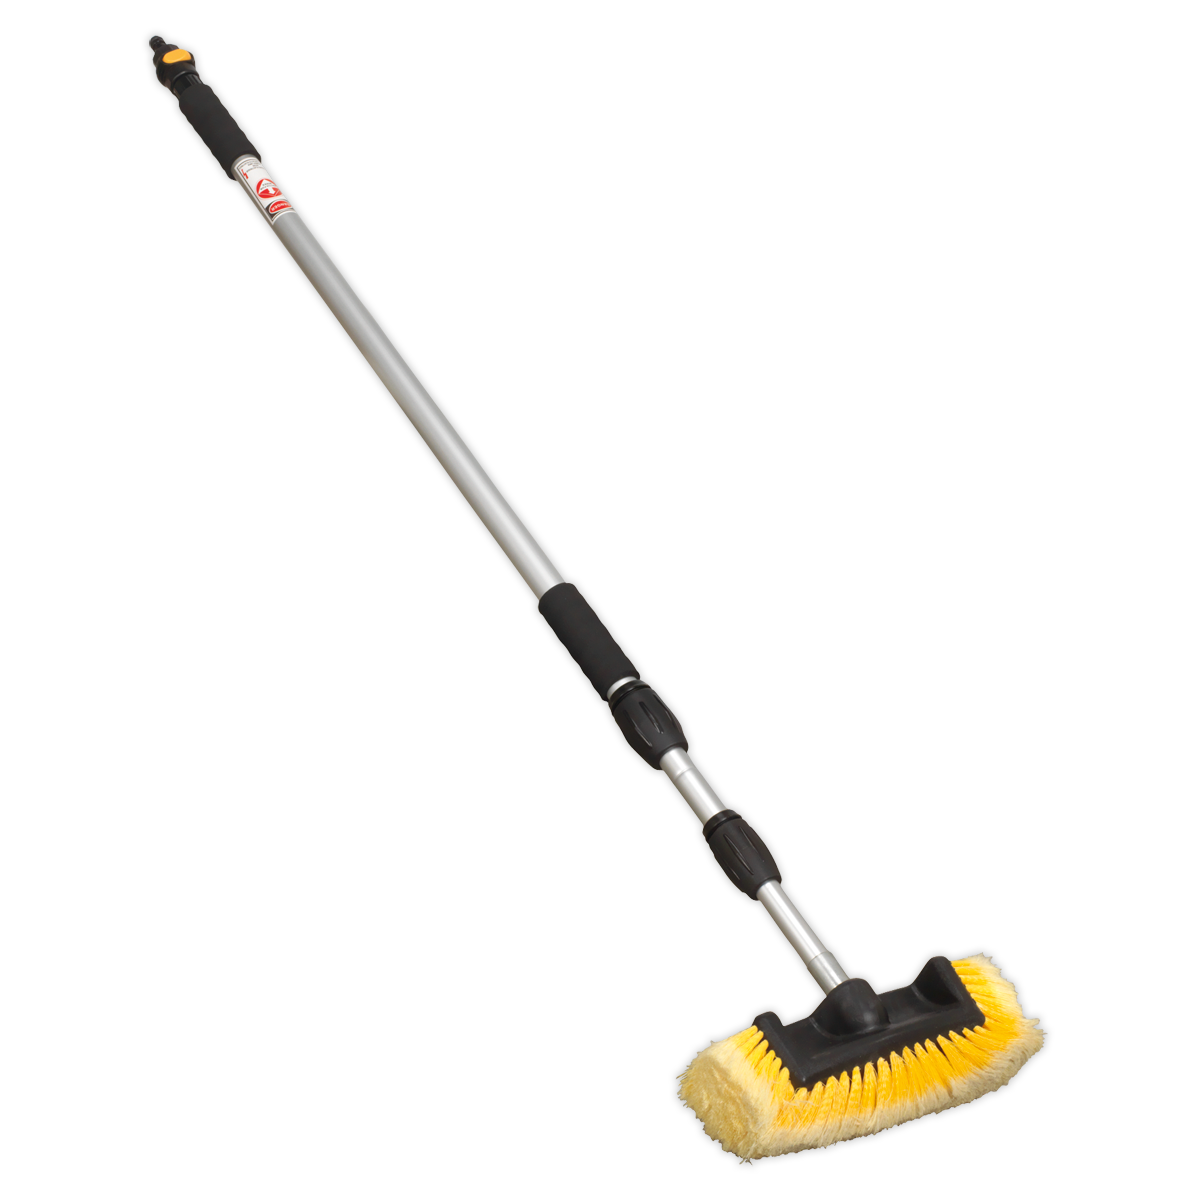 Sealey CC953 Five Sided Flo-Thru Brush with 3m Telescopic Handle